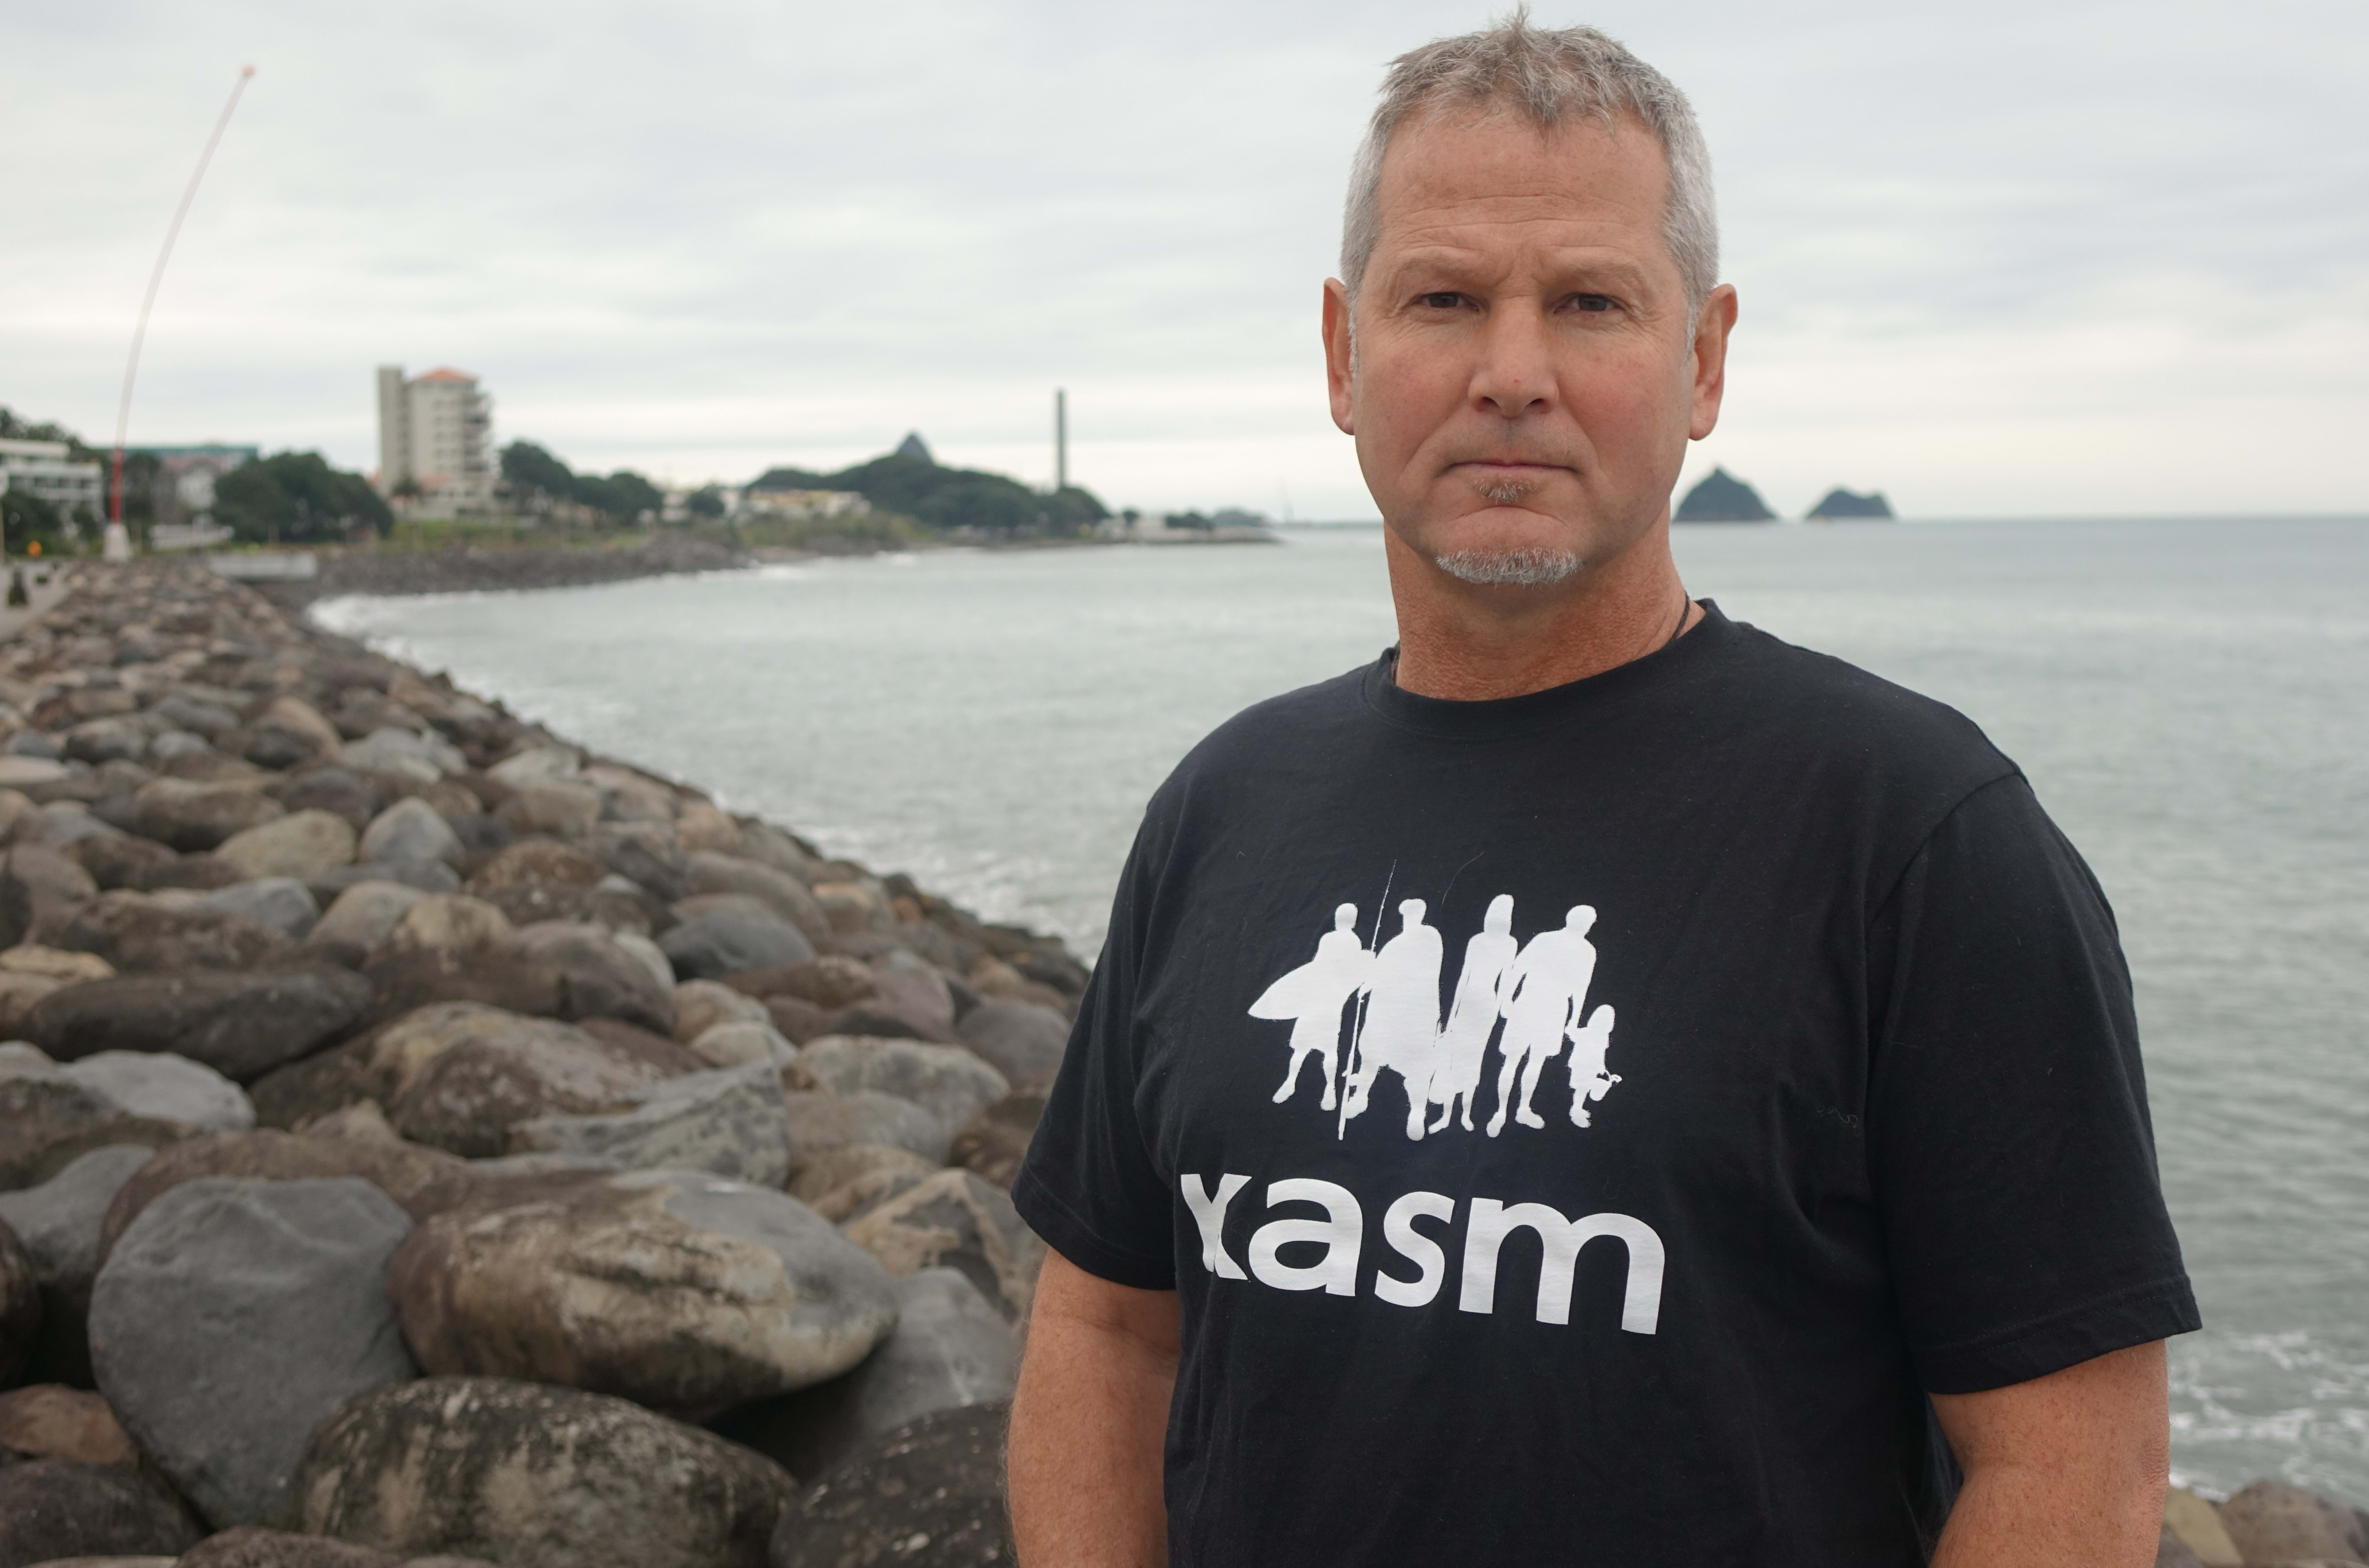 Kasm's Phil McCabe says the blacked out pages in Trans-Tasman Resources application should be released to the public